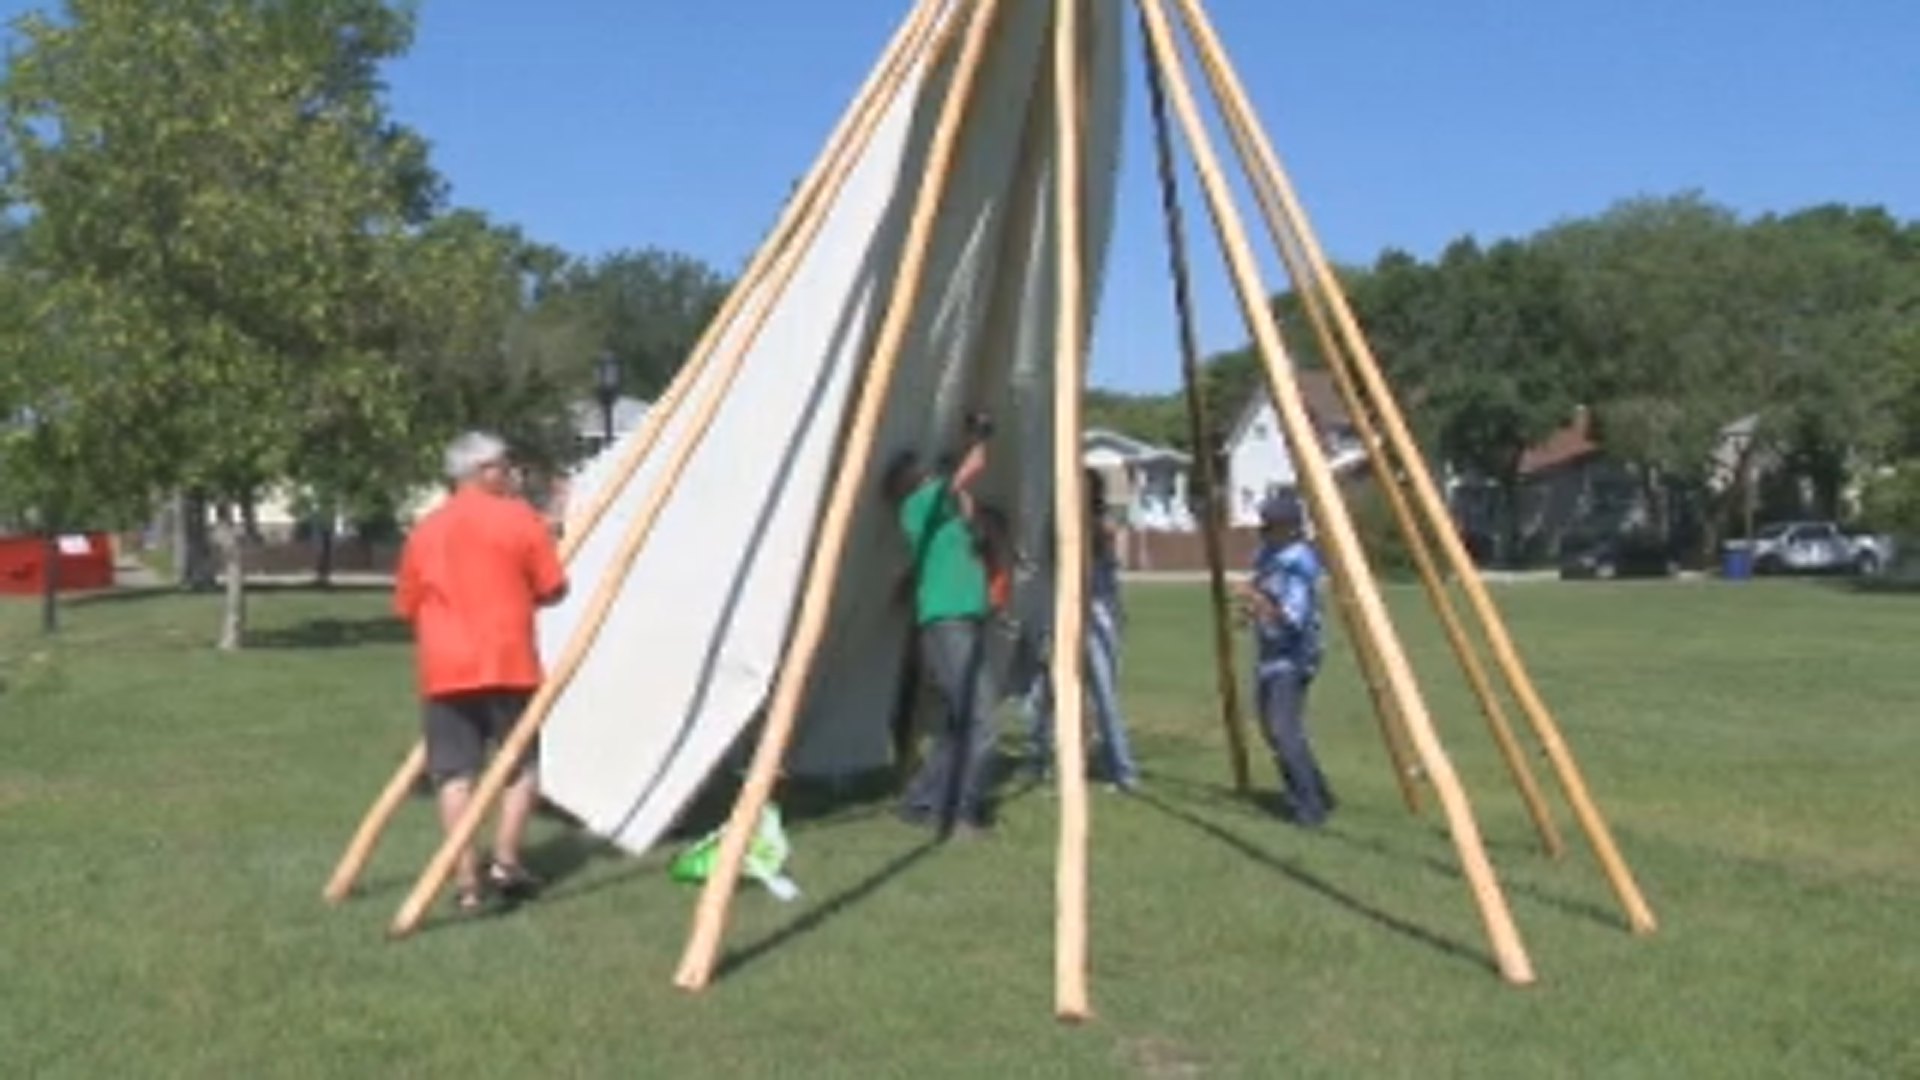 Dozens gathered in Buffalo Meadows Park for Buffalo Day on July 1, 2021, a time to celebrate being Indigenous.